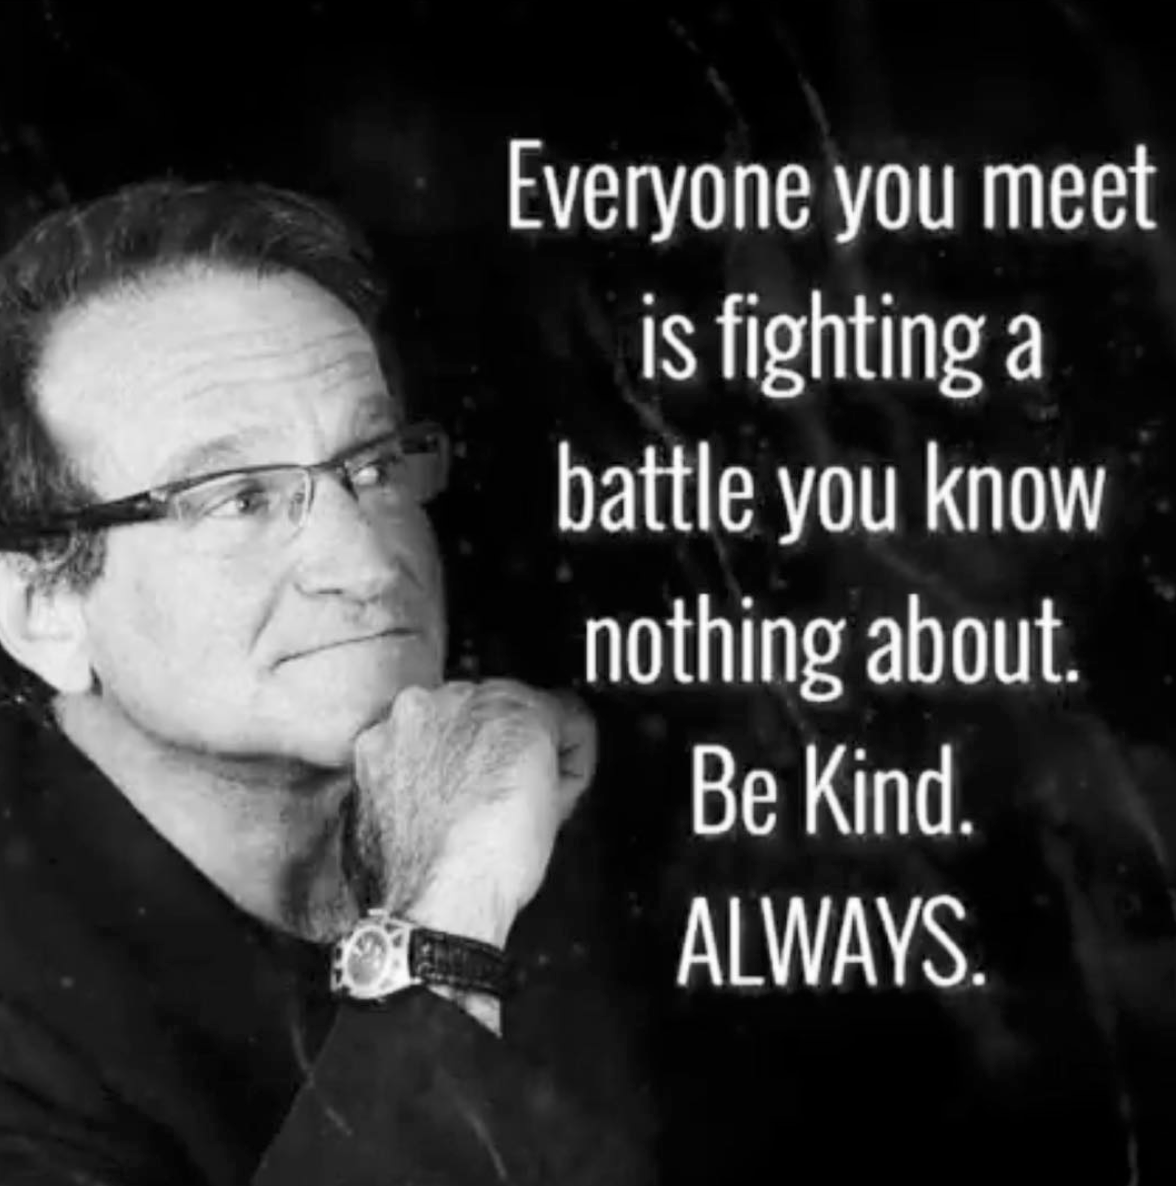 everyone has their struggle - Everyone you meet is fighting a battle you know nothing about Be Kind. Always.